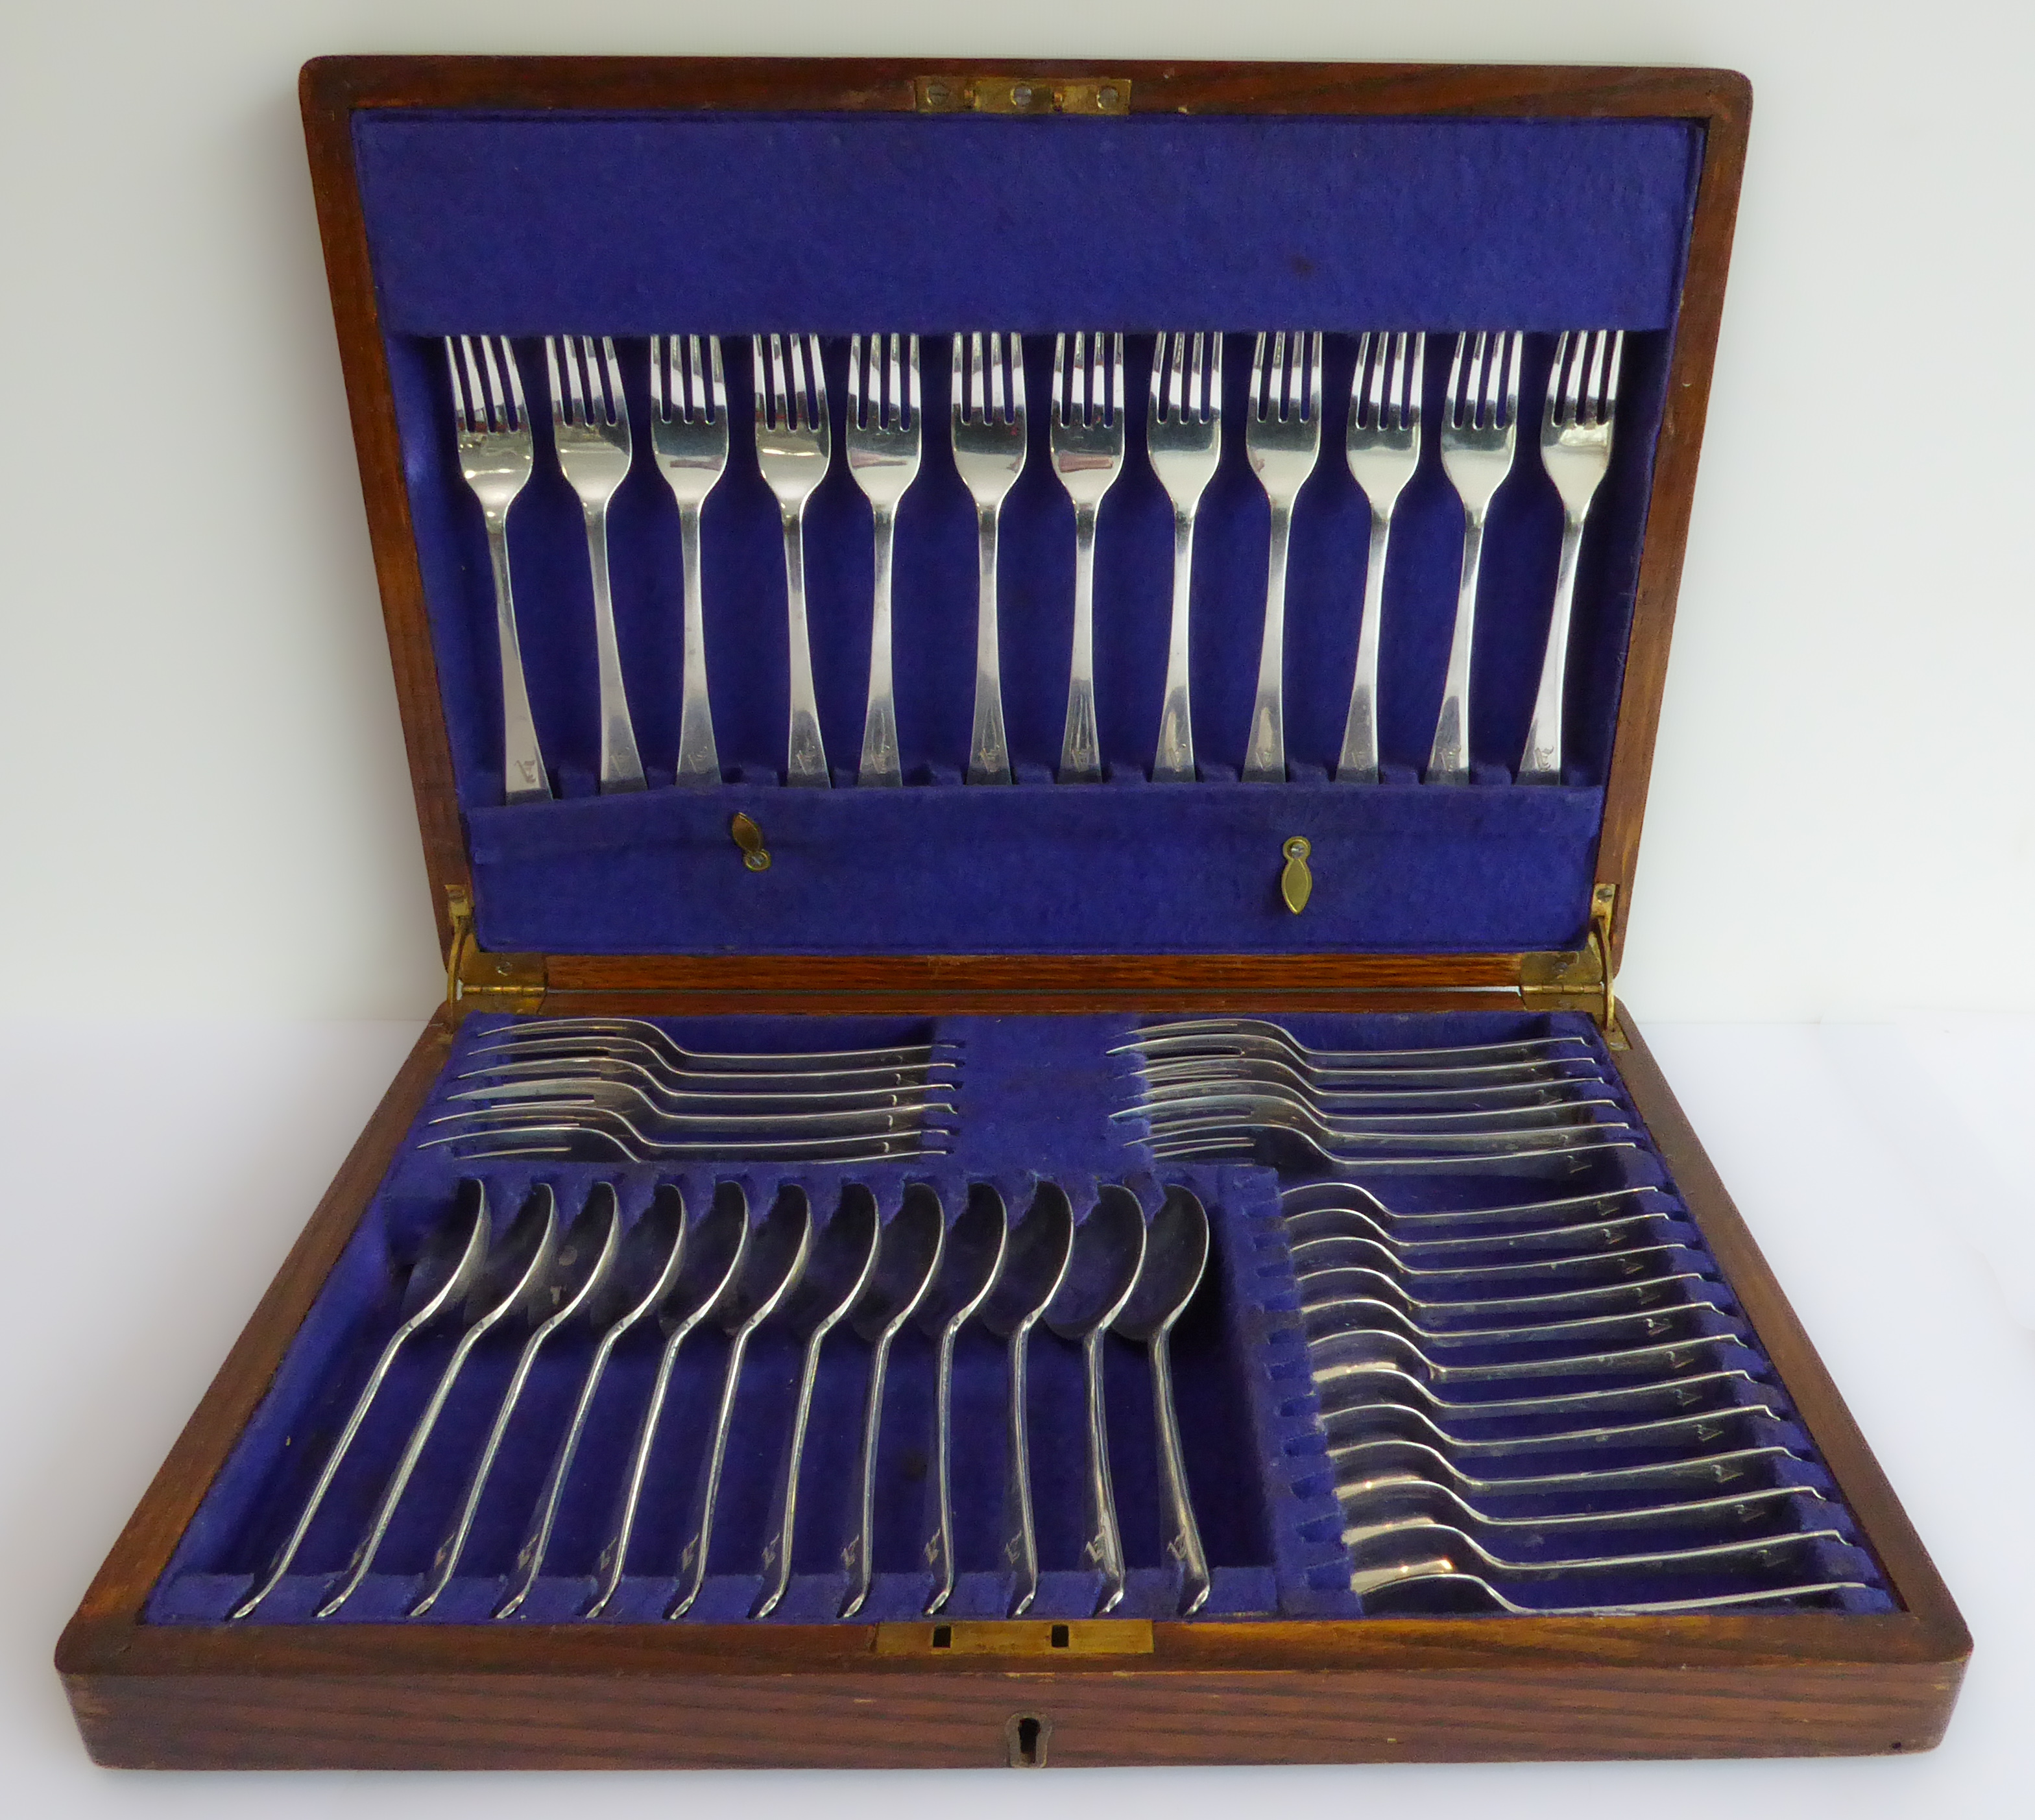 An oak-cased early 20th century 12-place hallmarked silver flatware set, each piece monogrammed A,